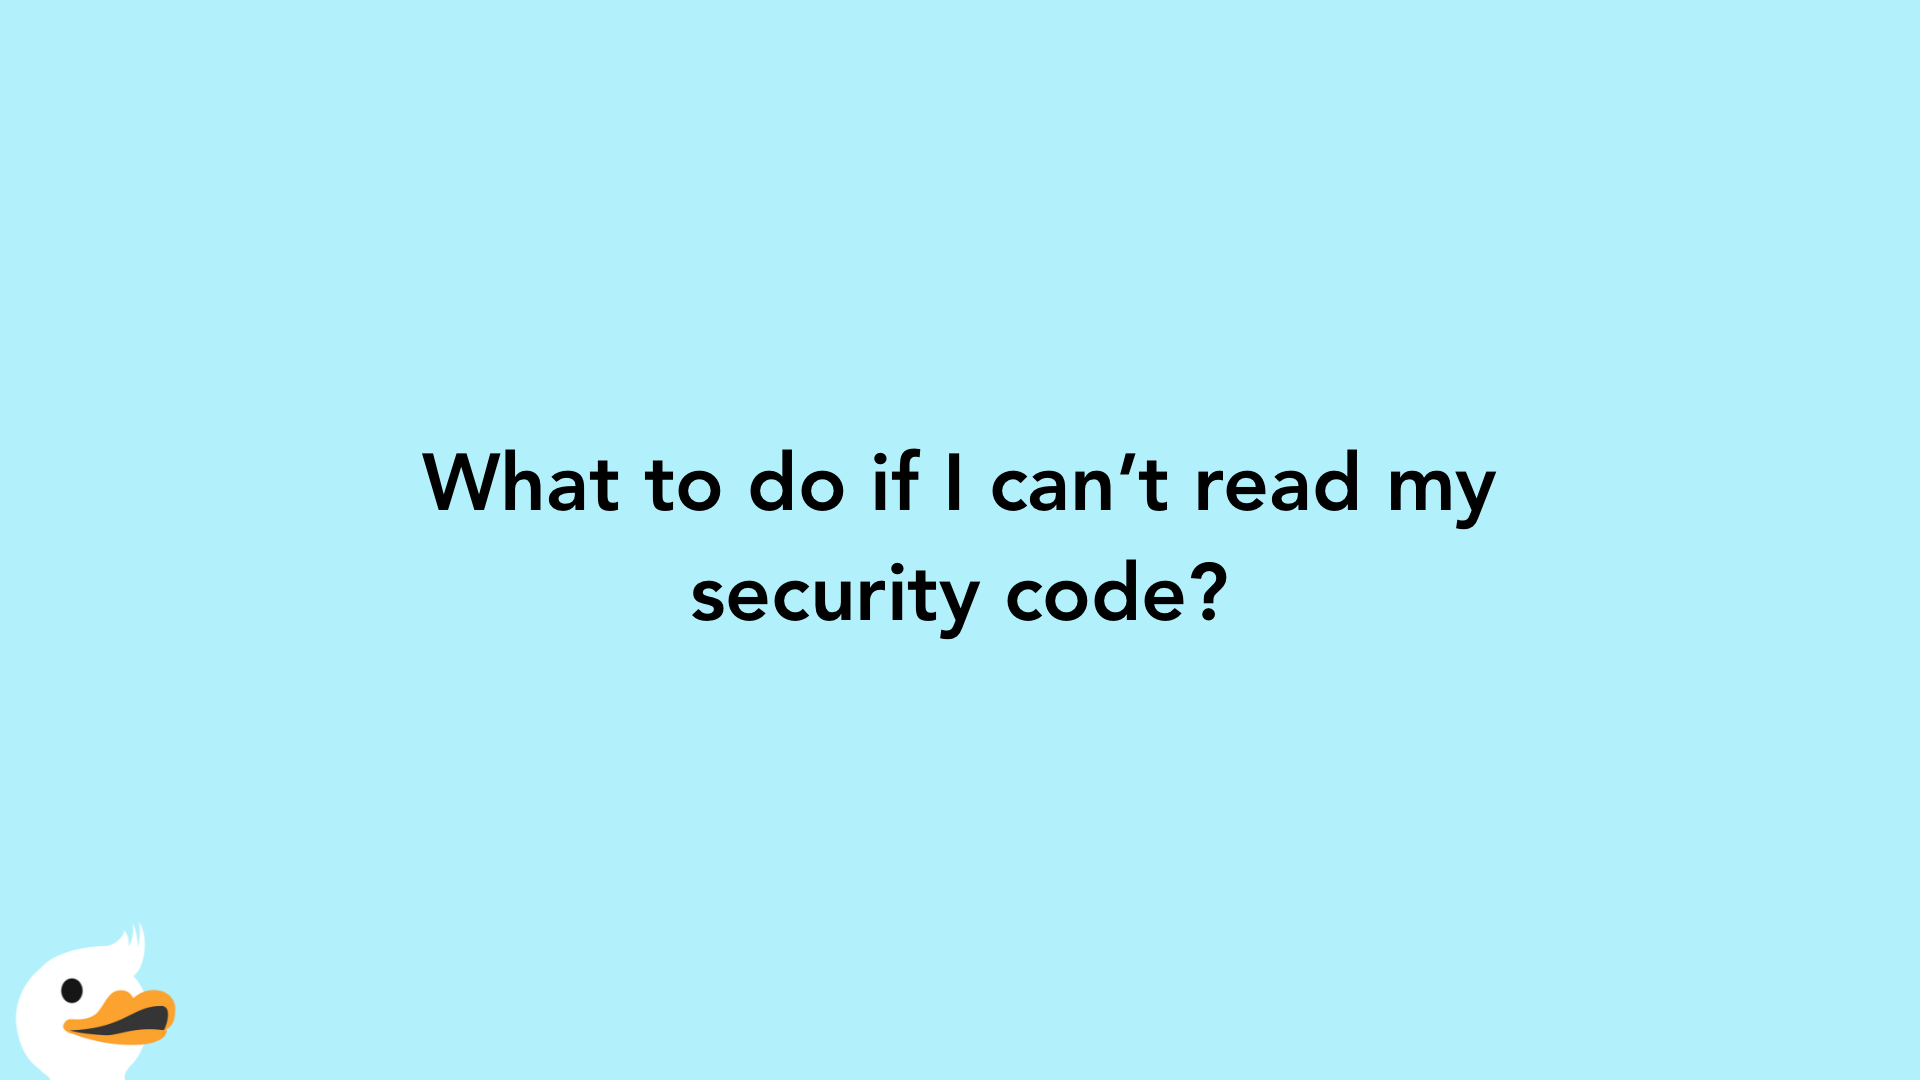 What to do if I can’t read my security code?